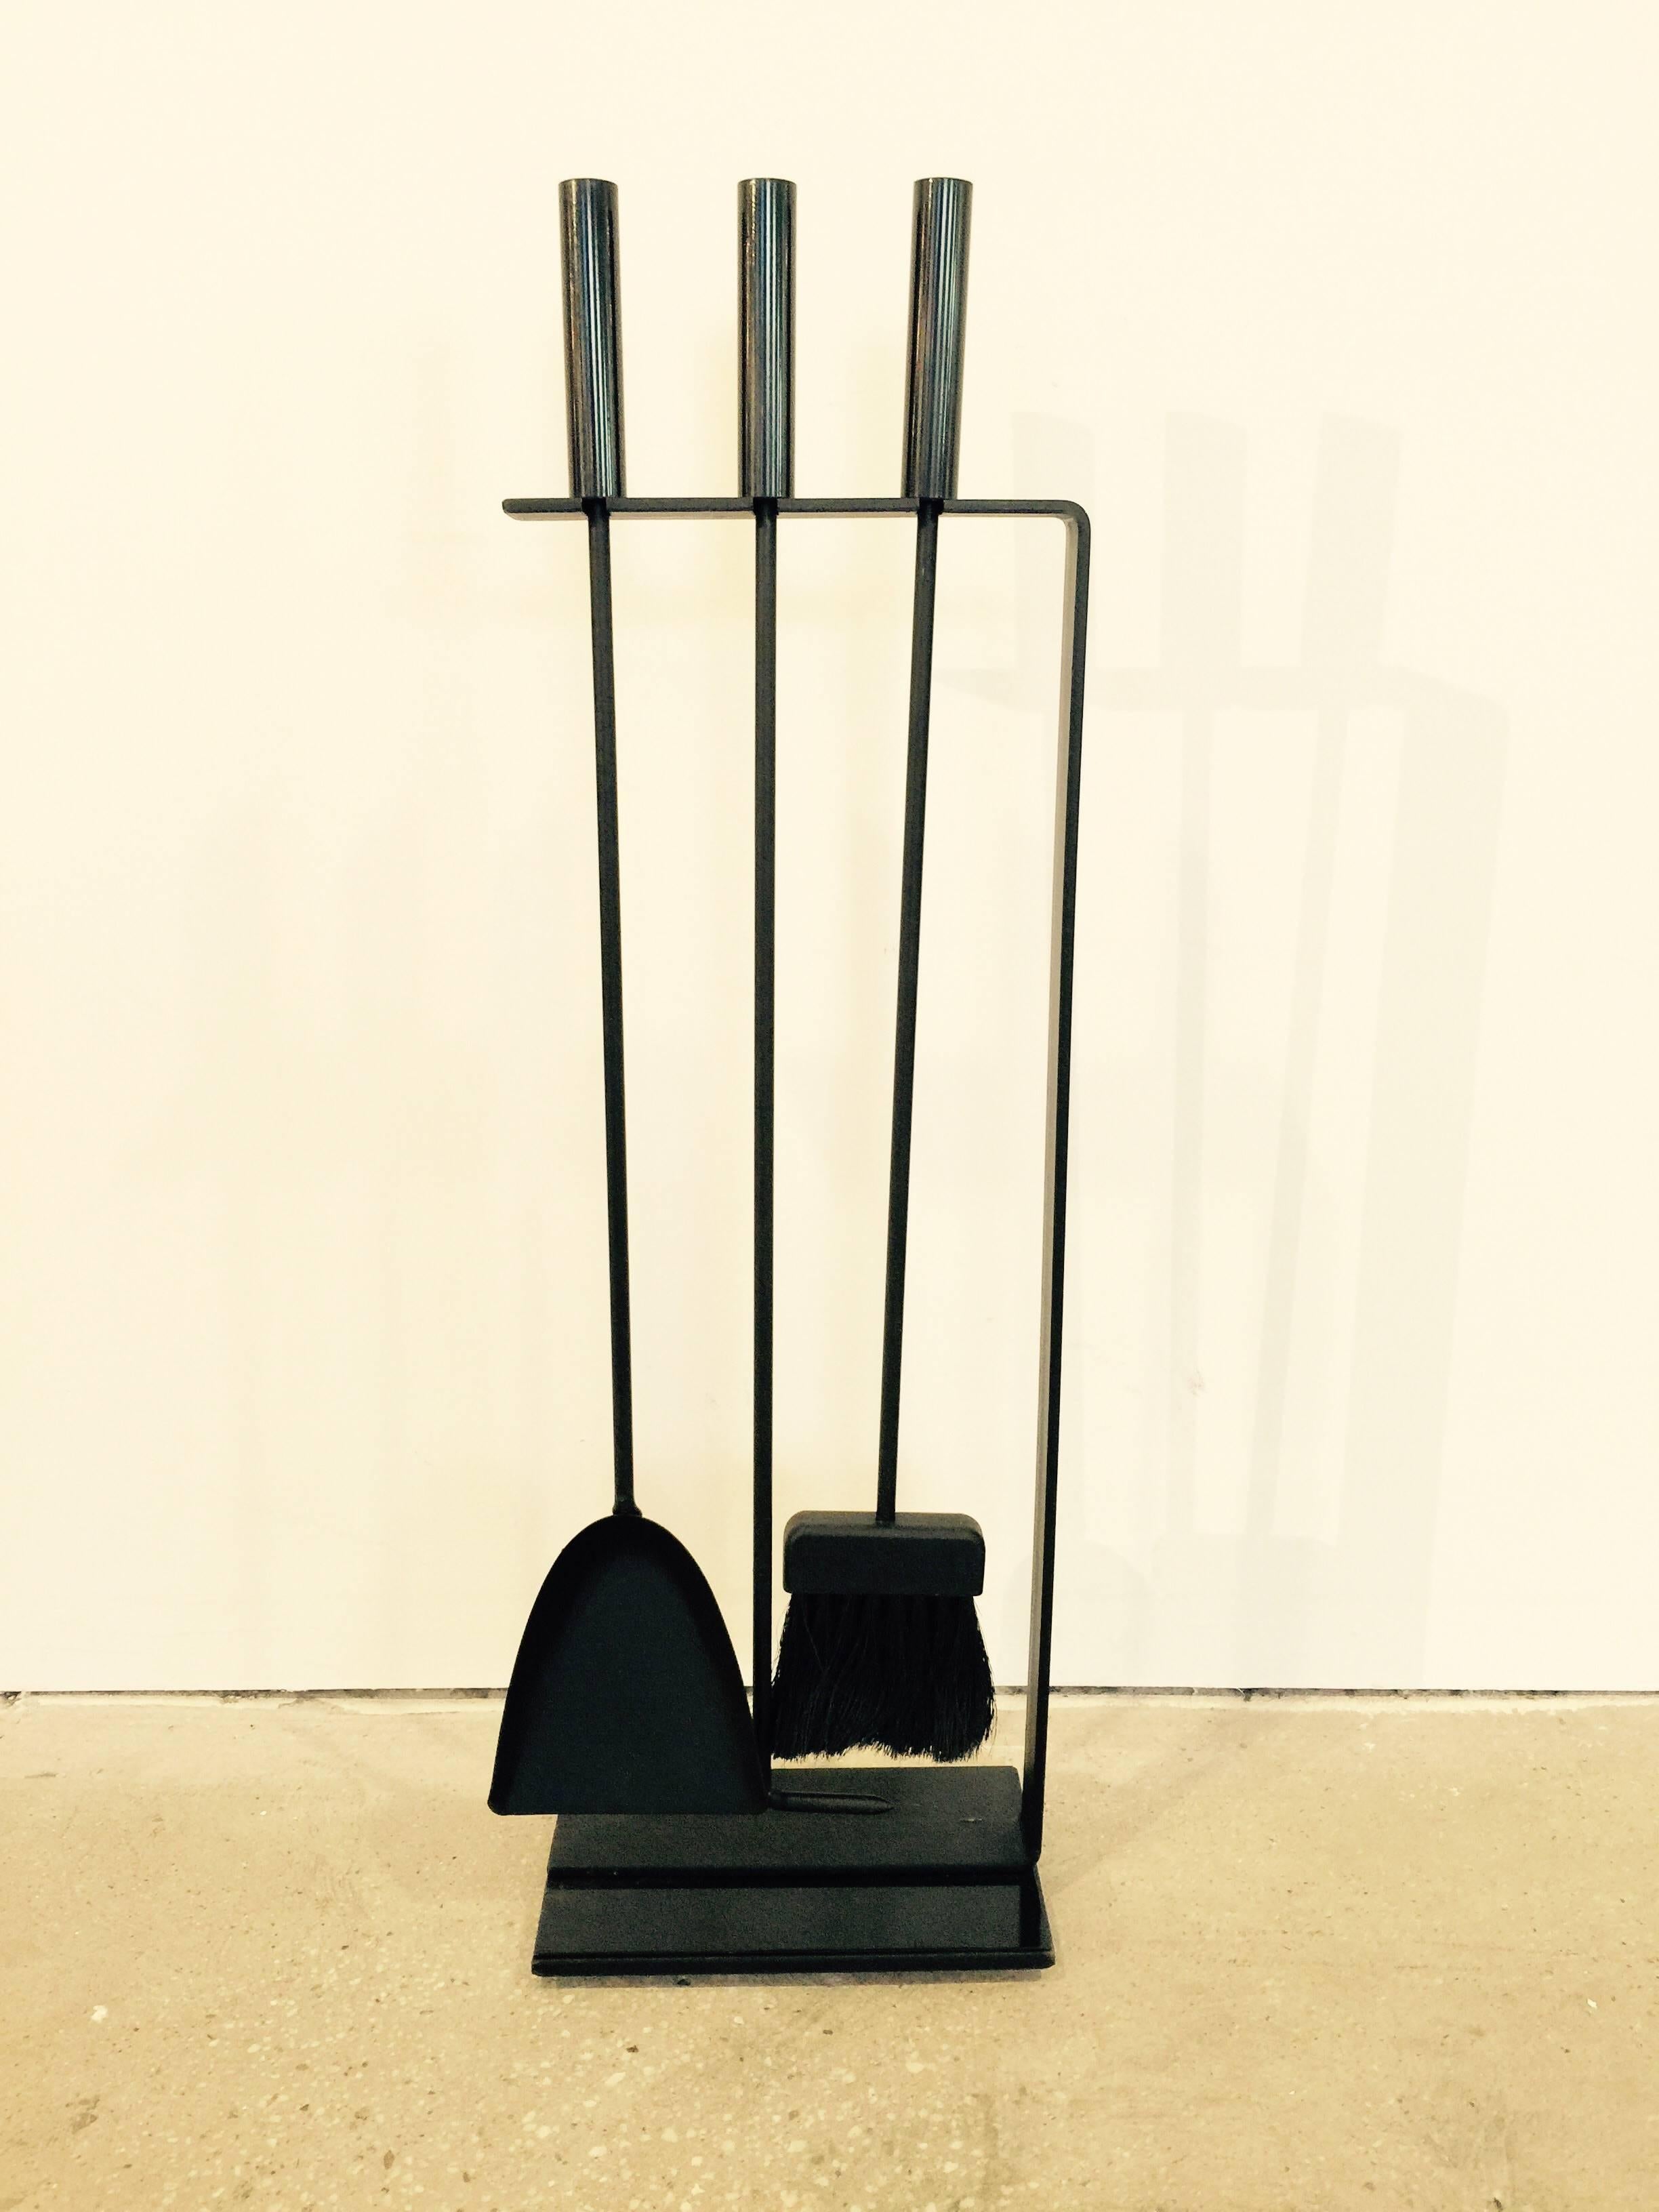 Fireplace tool set with stand by Pilgrim. USA, circa 1960.  Includes stand with three tools: shovel, poker, brush. Matte black iron with gloss enamel base detail and handles. 

Dimensions: 12